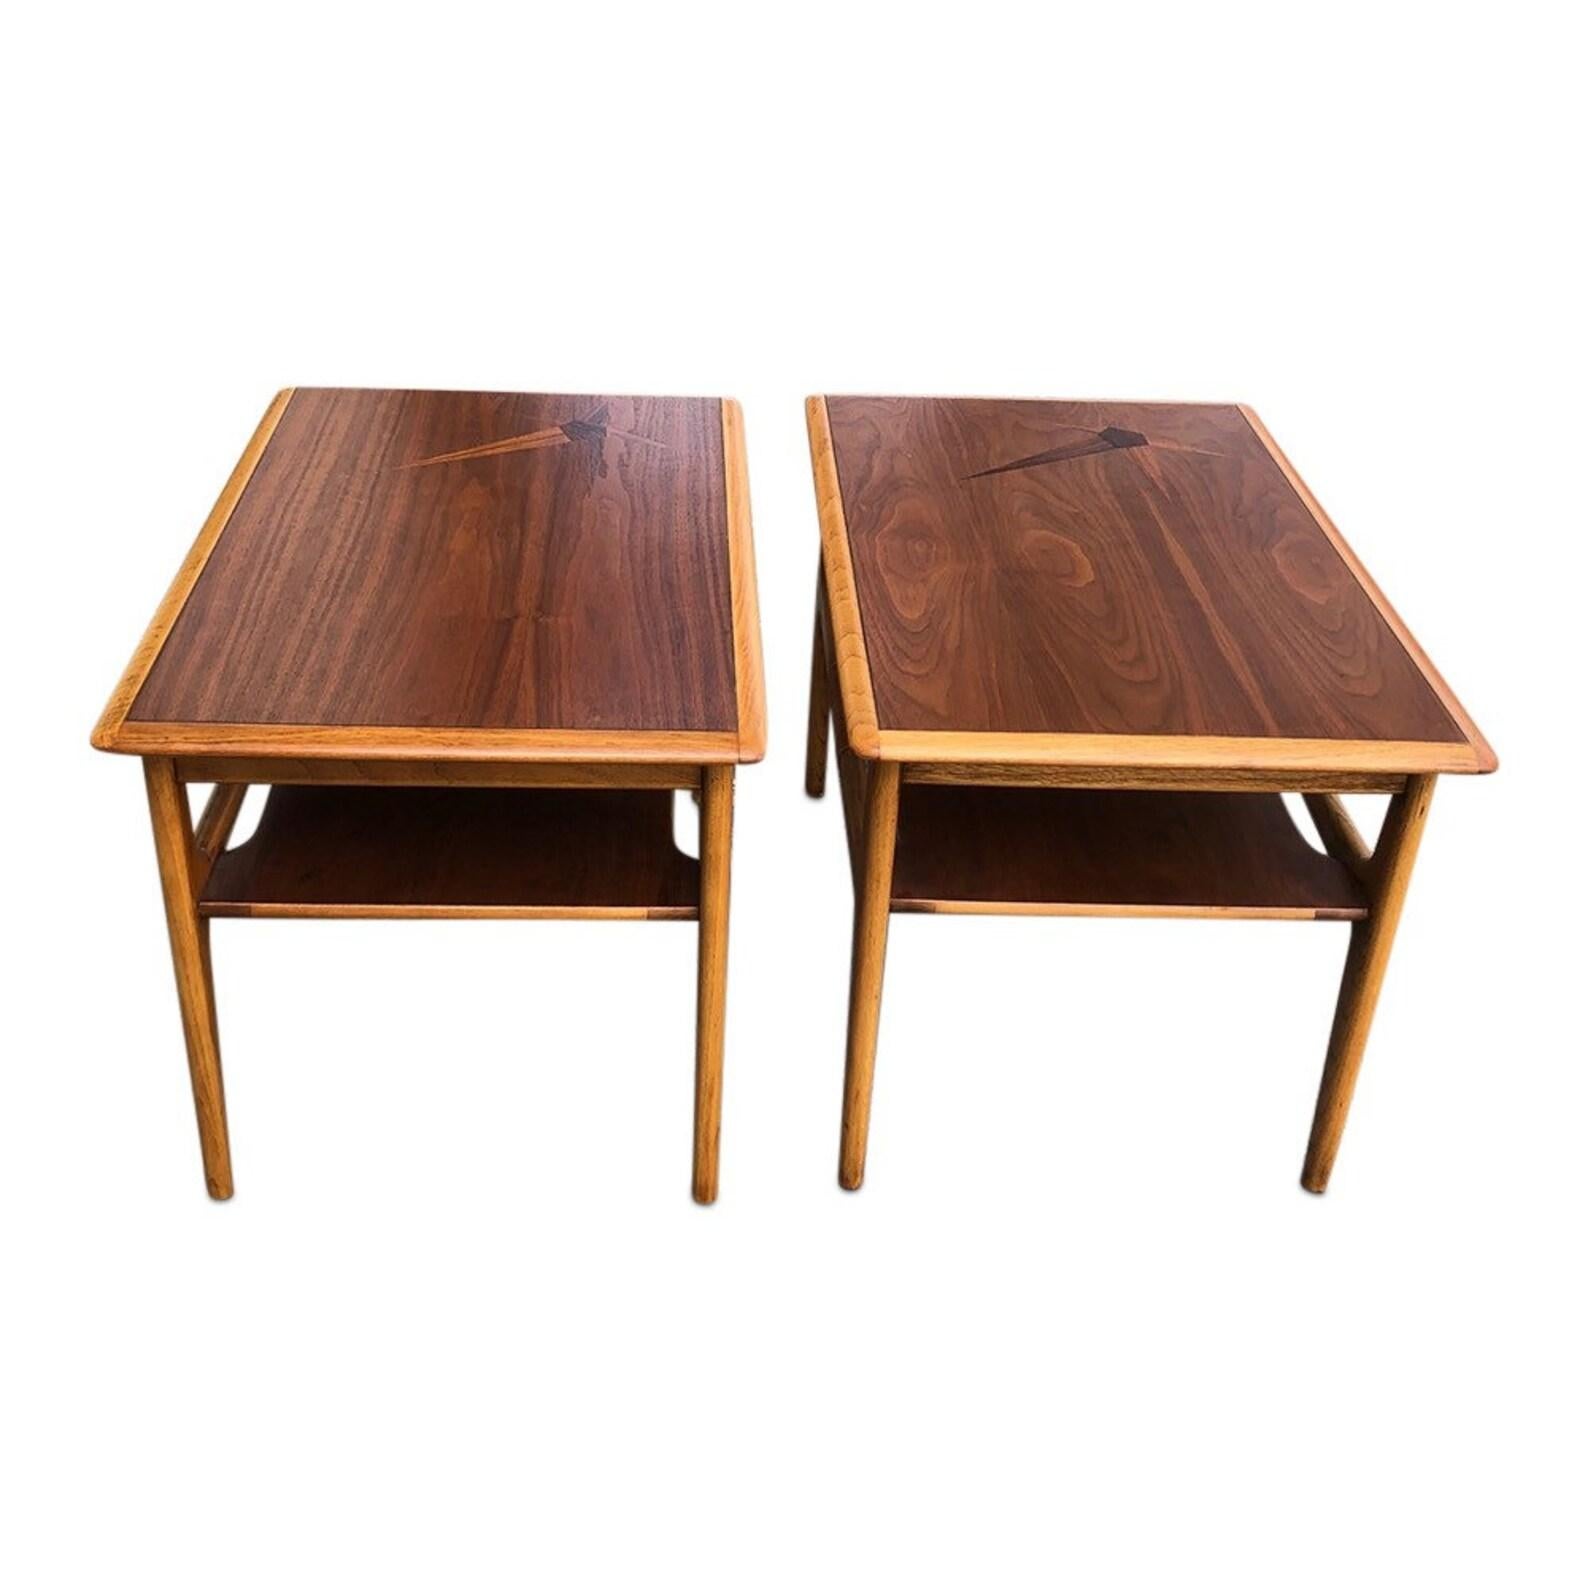 Mid-20th Century Pair of Mid-Century Modern Two-Toned Side End Tables with Shelf